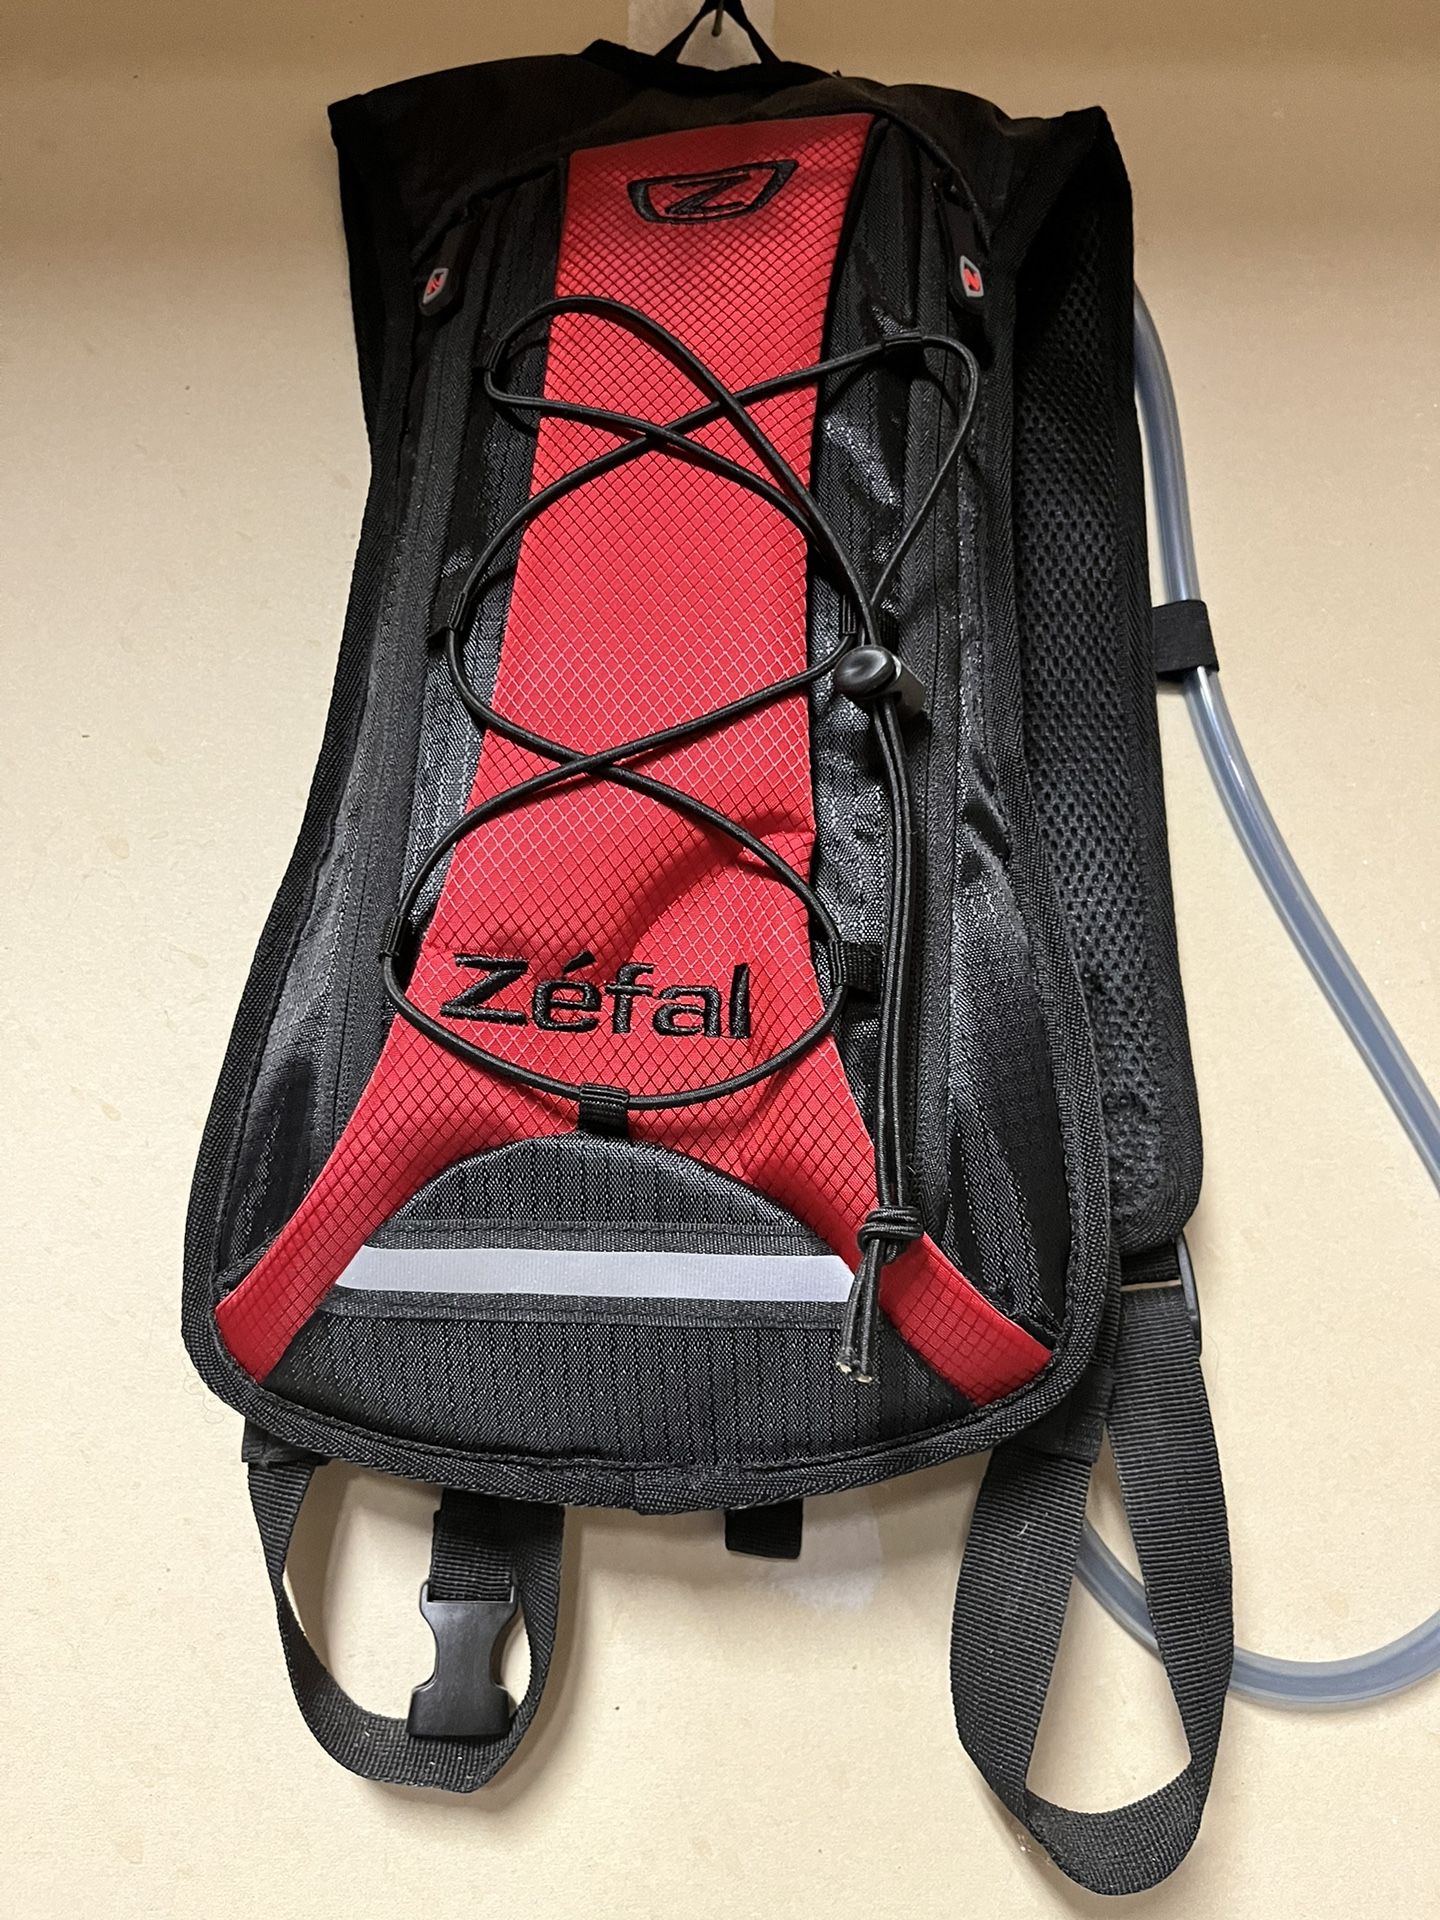 Smaller Water Backpack